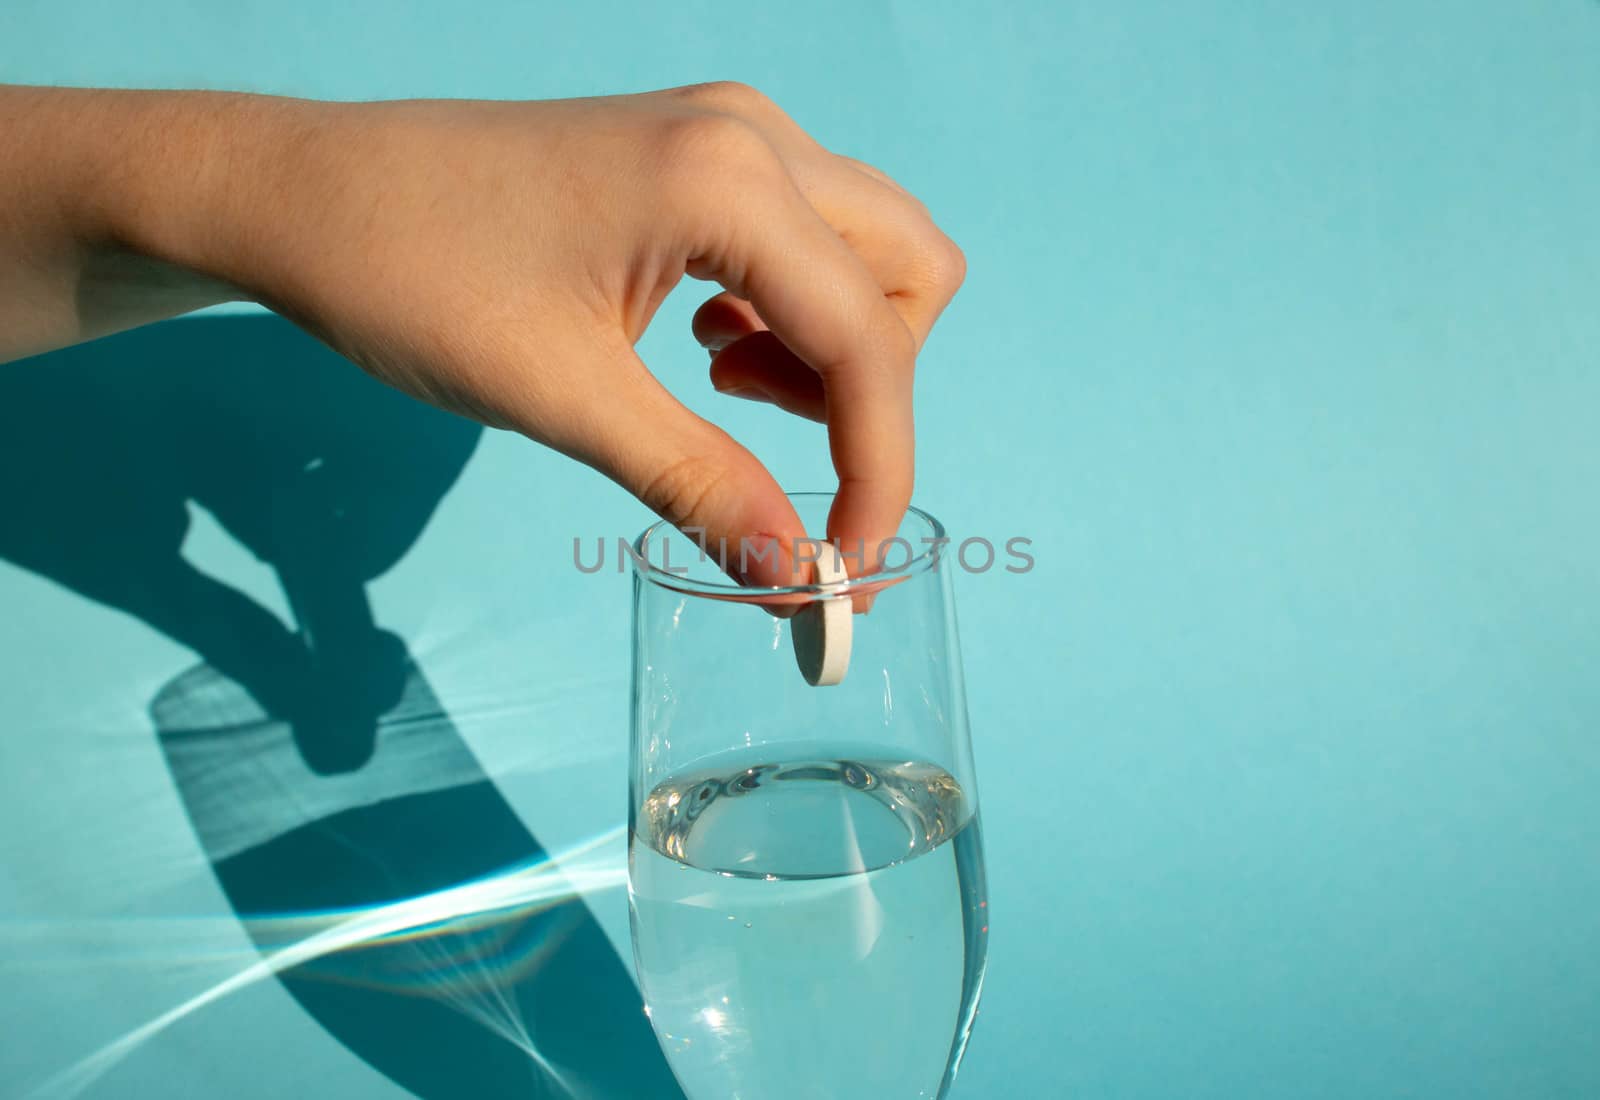 Against a blue background, a hand drops a dissolving fizzy aspirin tablet into a glass of water